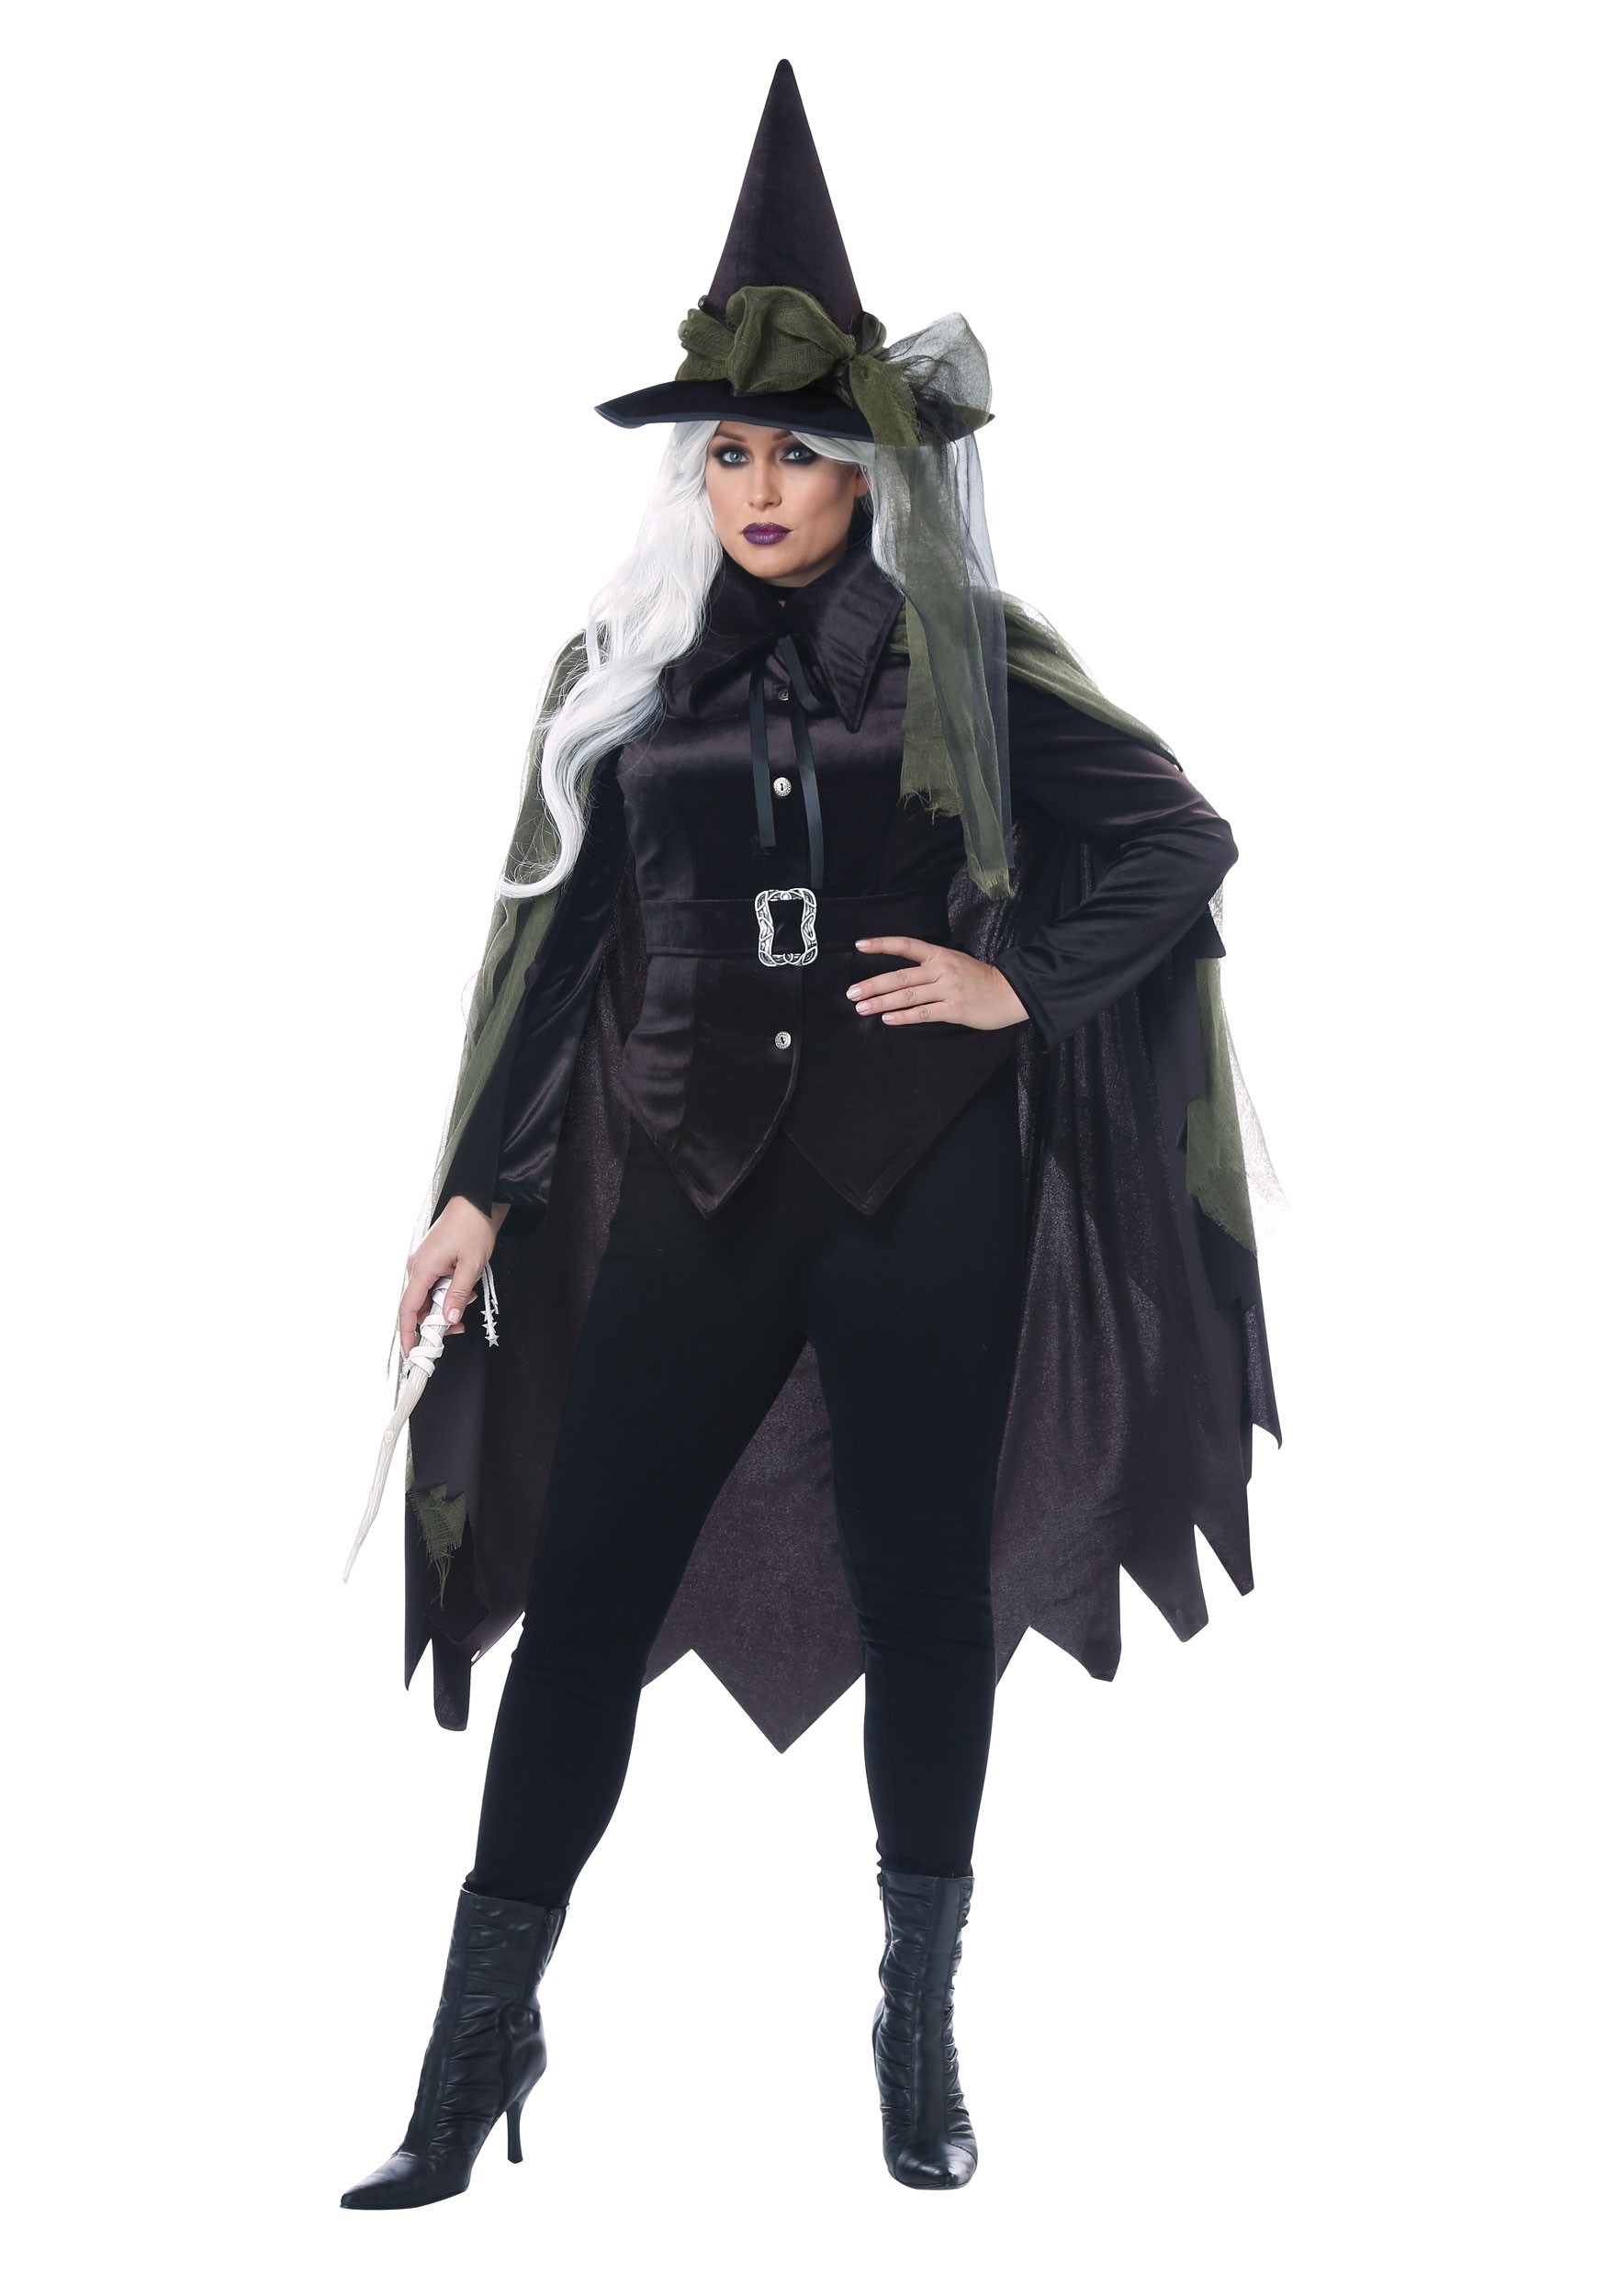 Photos - Fancy Dress California Costume Collection Plus Size Gothic Witch Women's Costume Black 